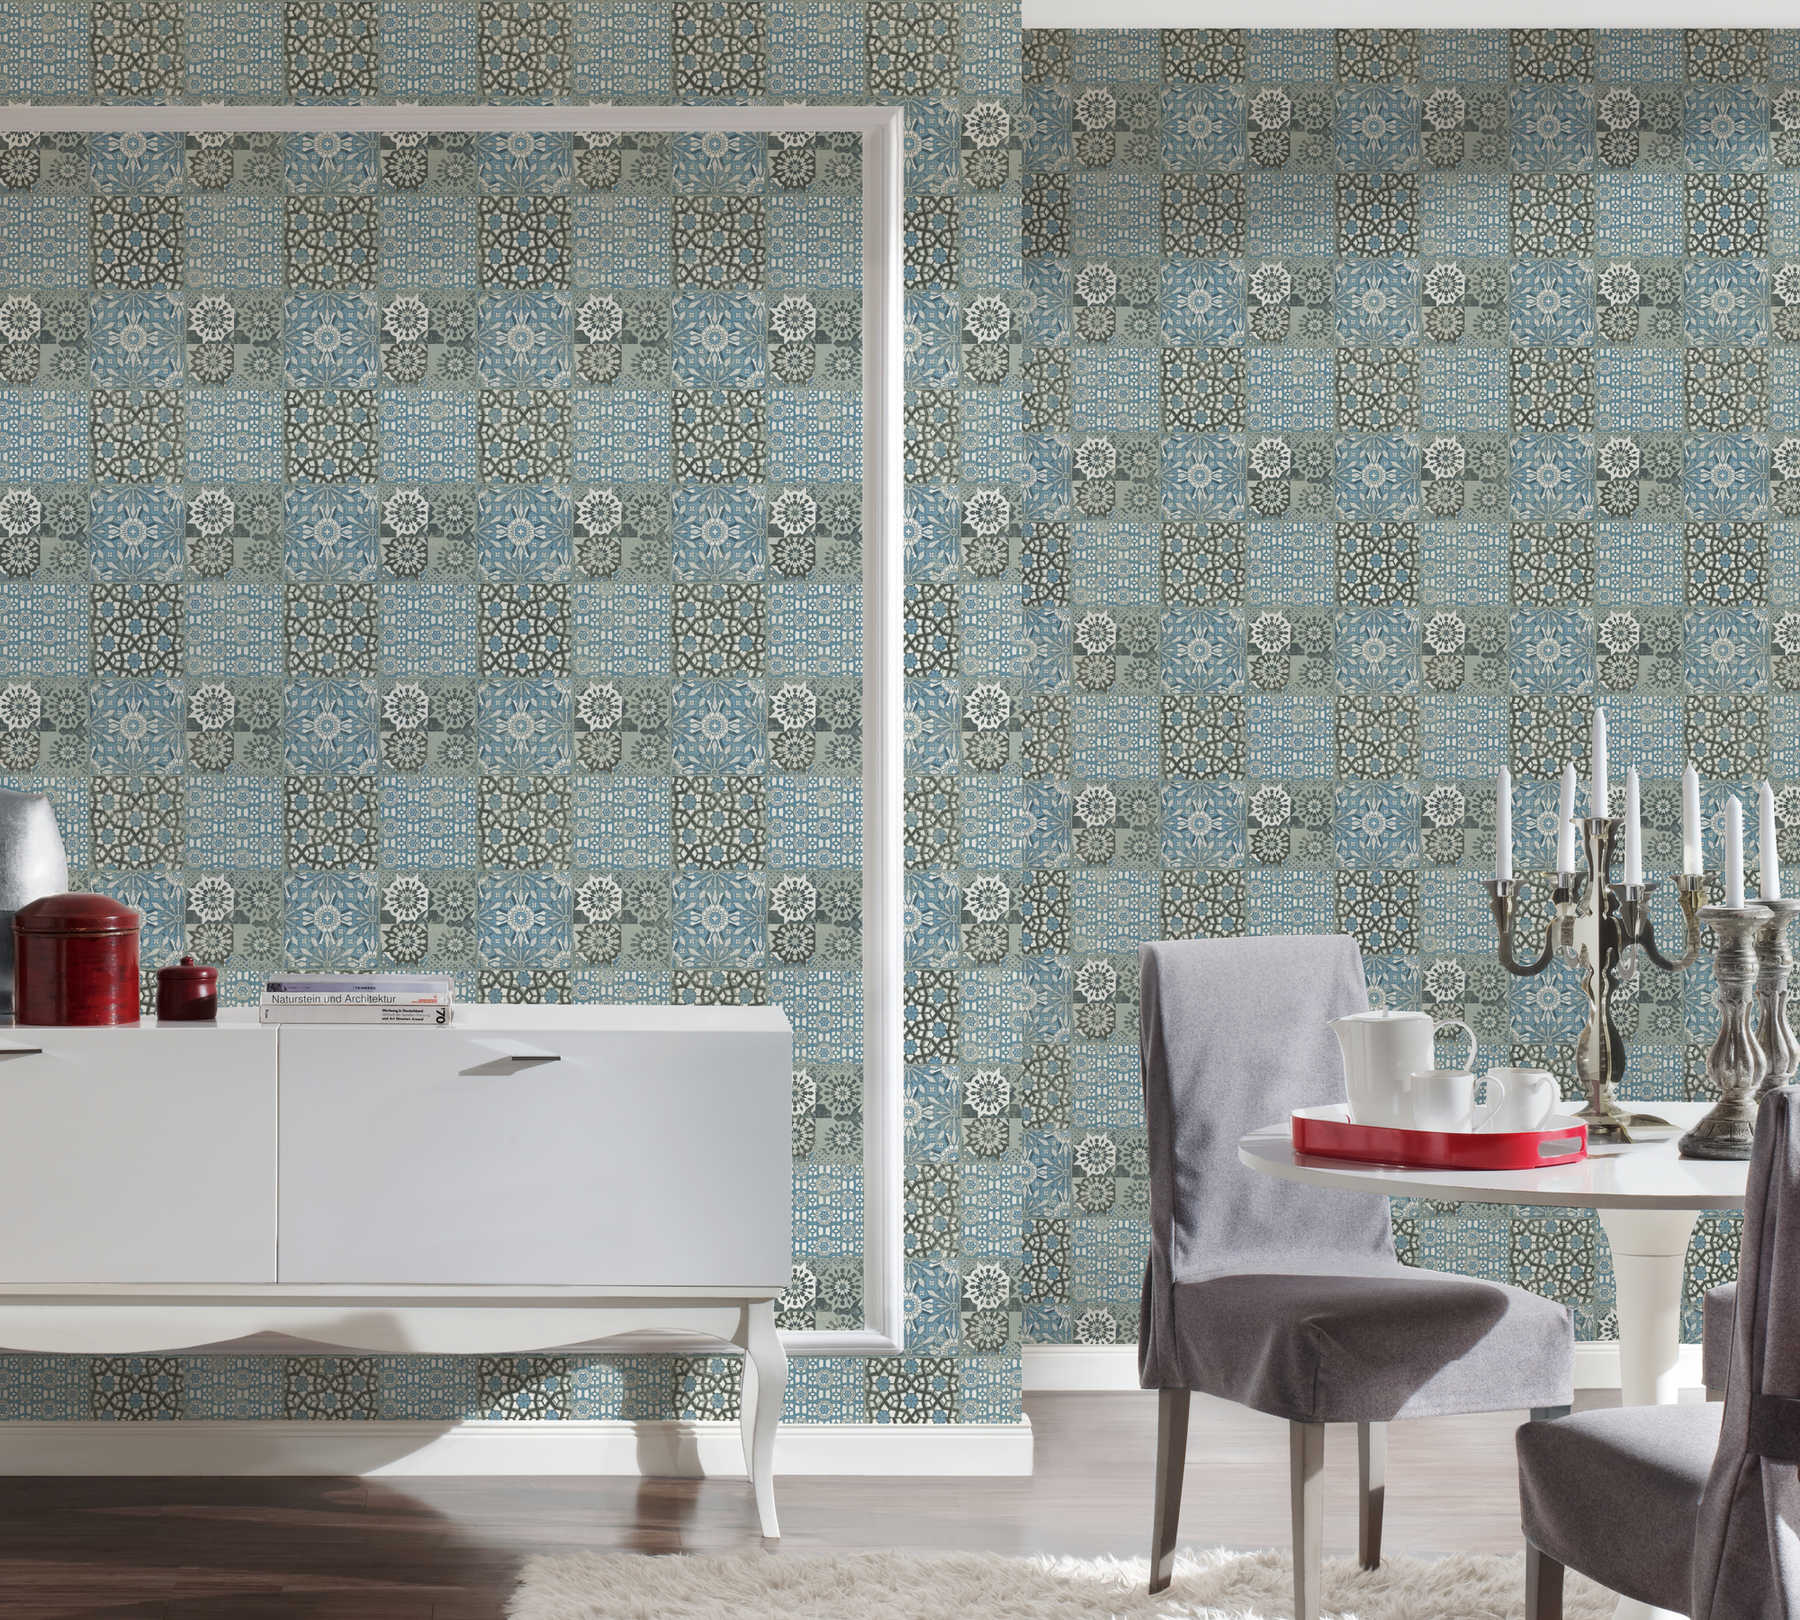             Tile wallpaper with retro pattern & used look - blue, grey
        